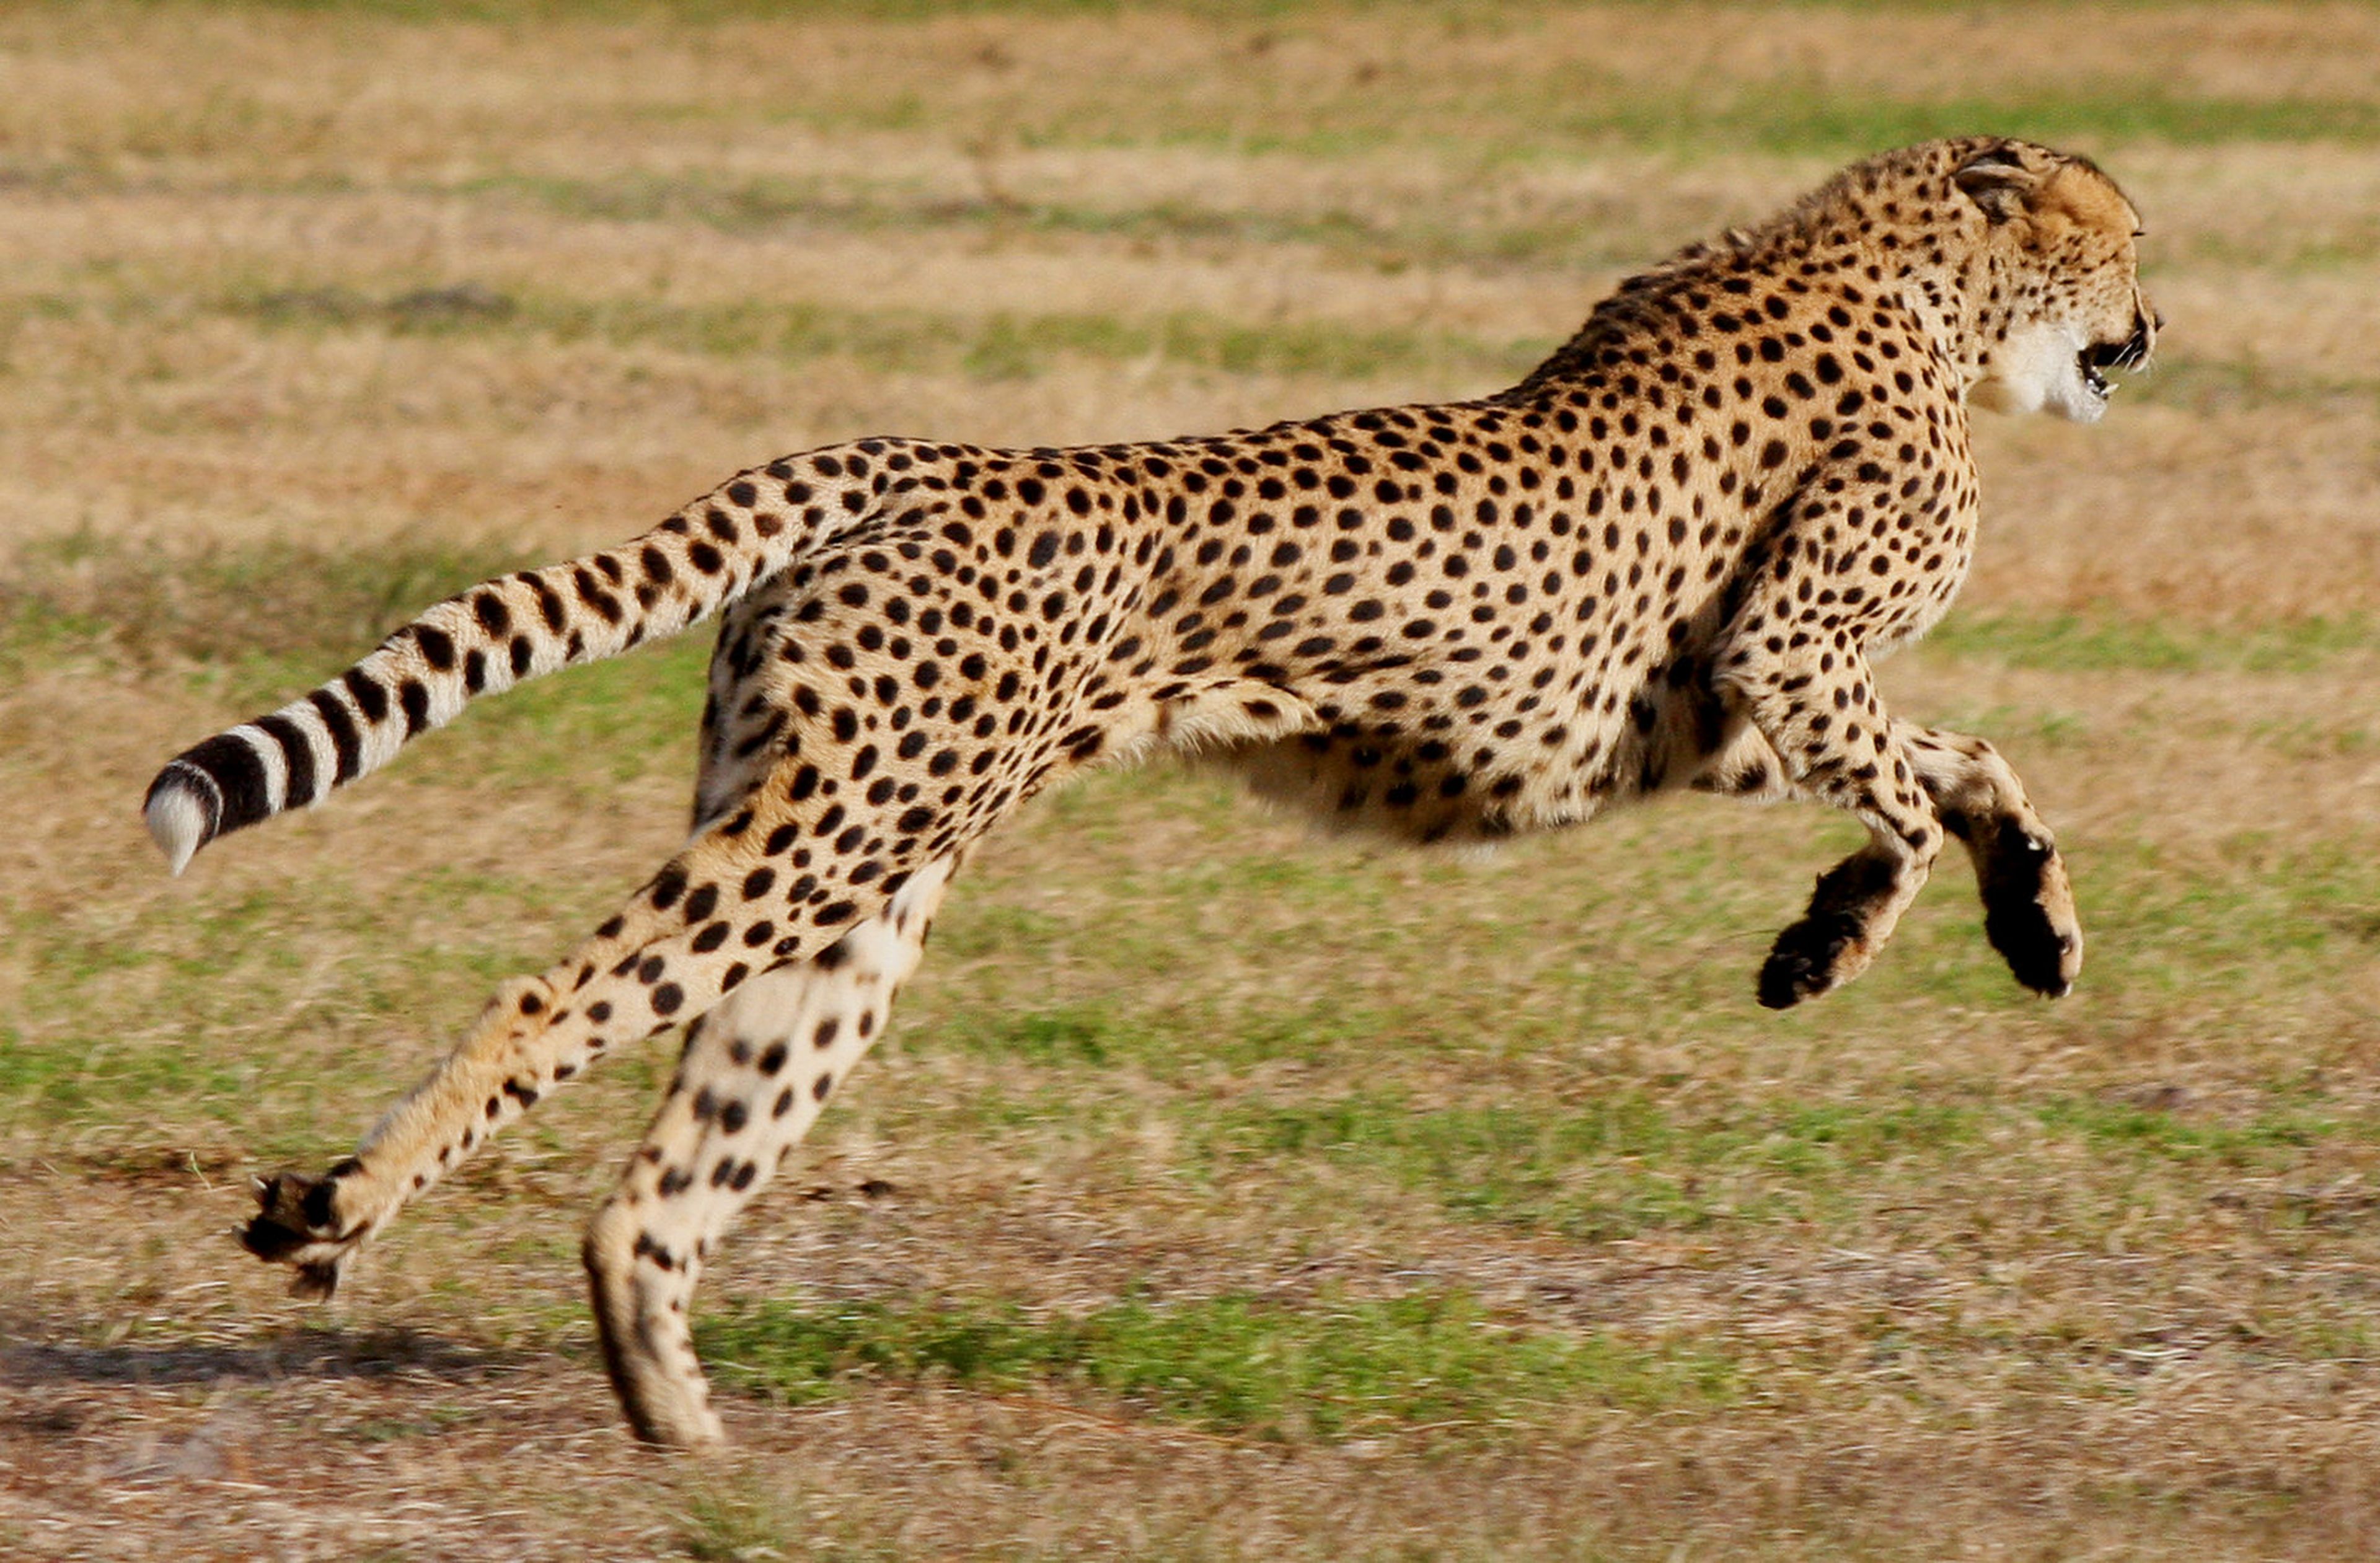 Ransomware takes about 42 minutes to complete running, according to a new report by Splunk. (&#8220;Cheetah Run 4&#8221; by Kauai Color is marked with CC BY-NC-ND 2.0.)